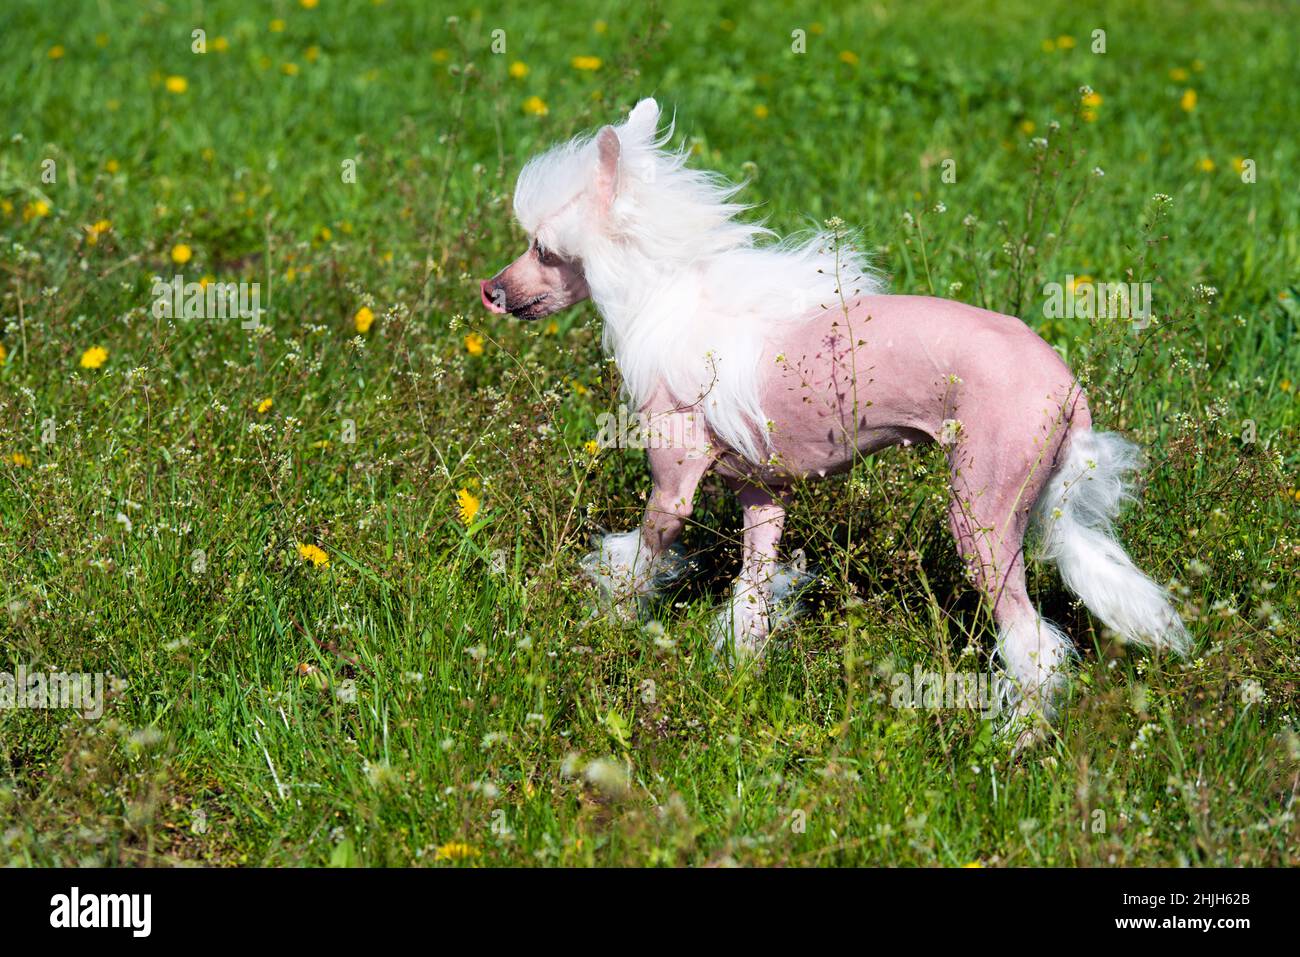 Chinese crested dog in park.     The Chinese crested dog walks on the grass of the park. Stock Photo